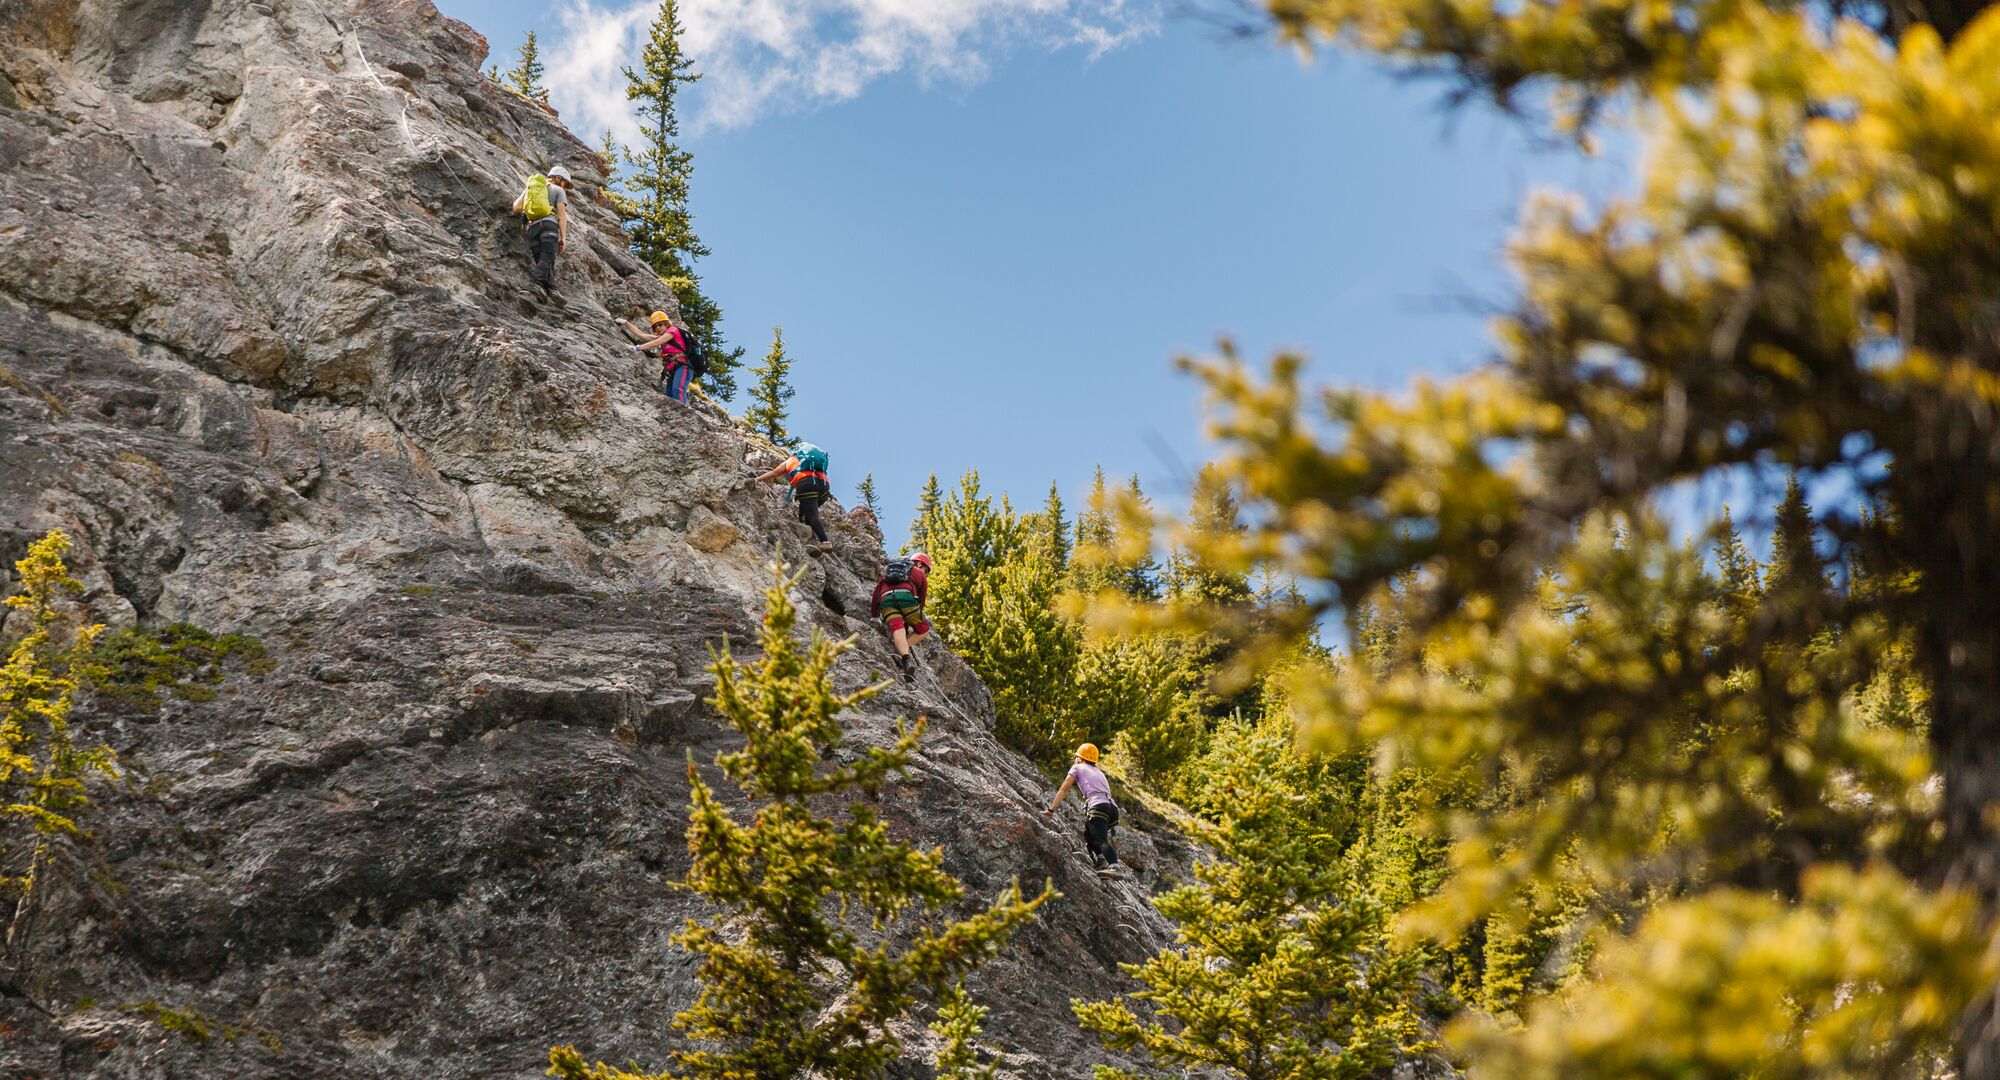 Group of people on a guided via ferrata experience at Mt. Norquay in Banff National Park